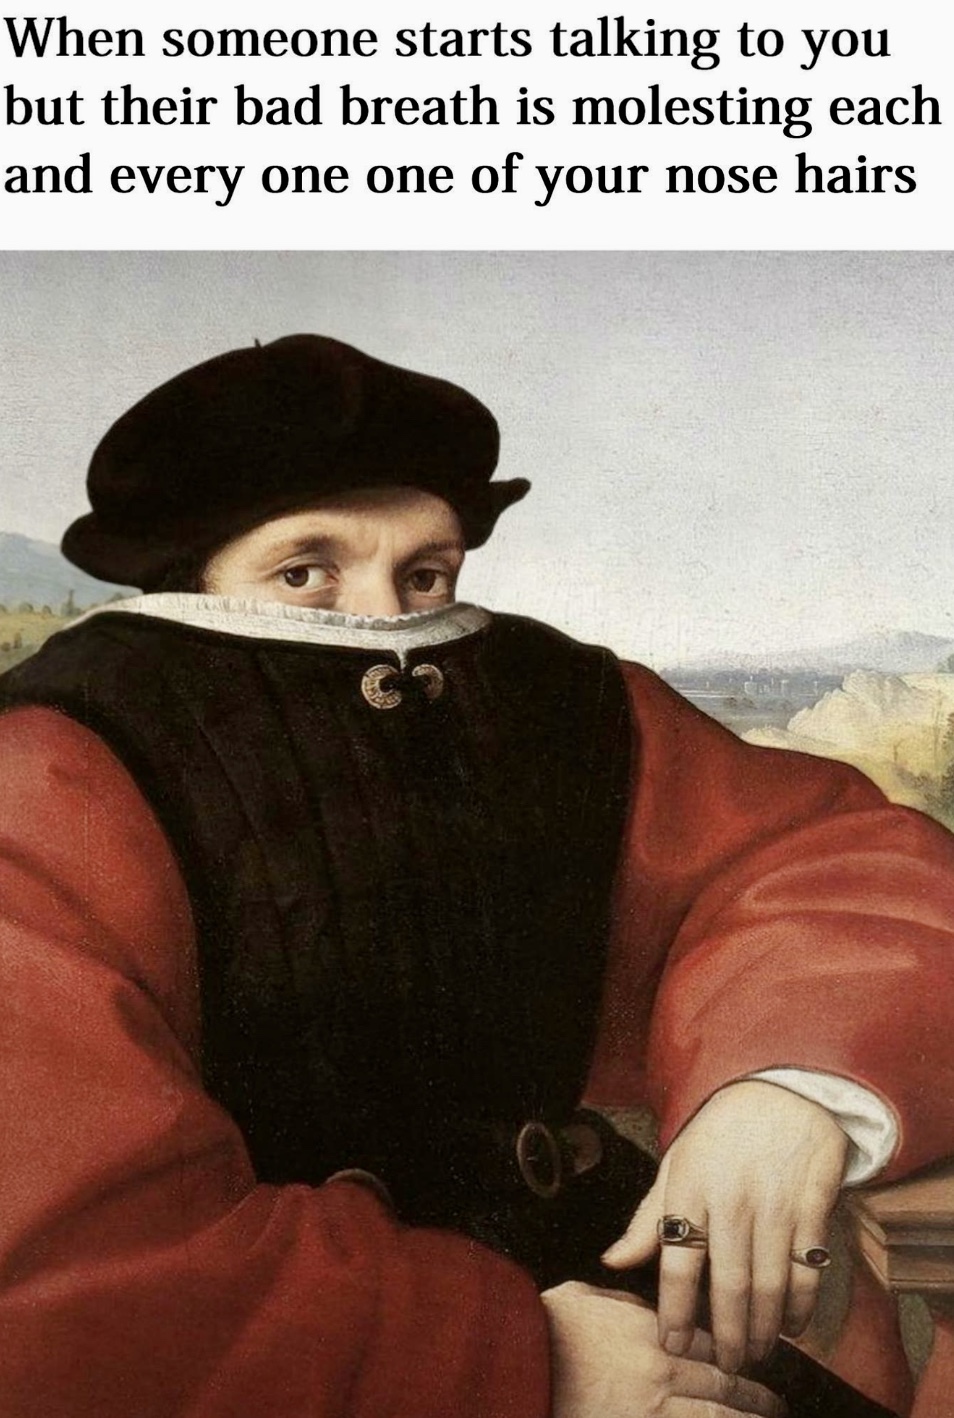 raphael artist - When someone starts talking to you but their bad breath is molesting each and every one one of your nose hairs